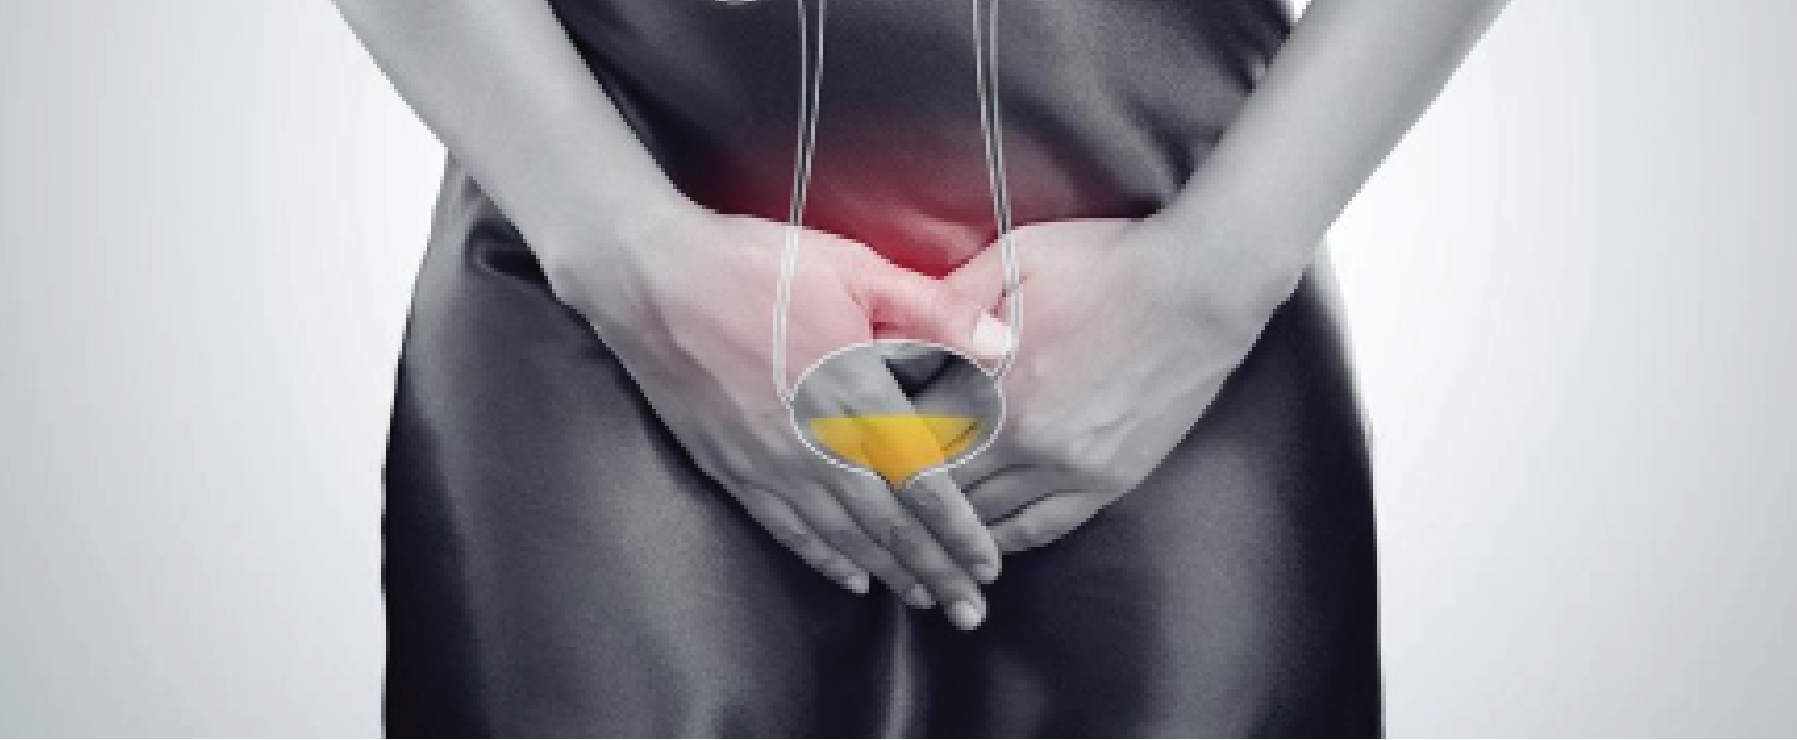 What Is the Best Thing to Do for a Urinary Tract Infection?